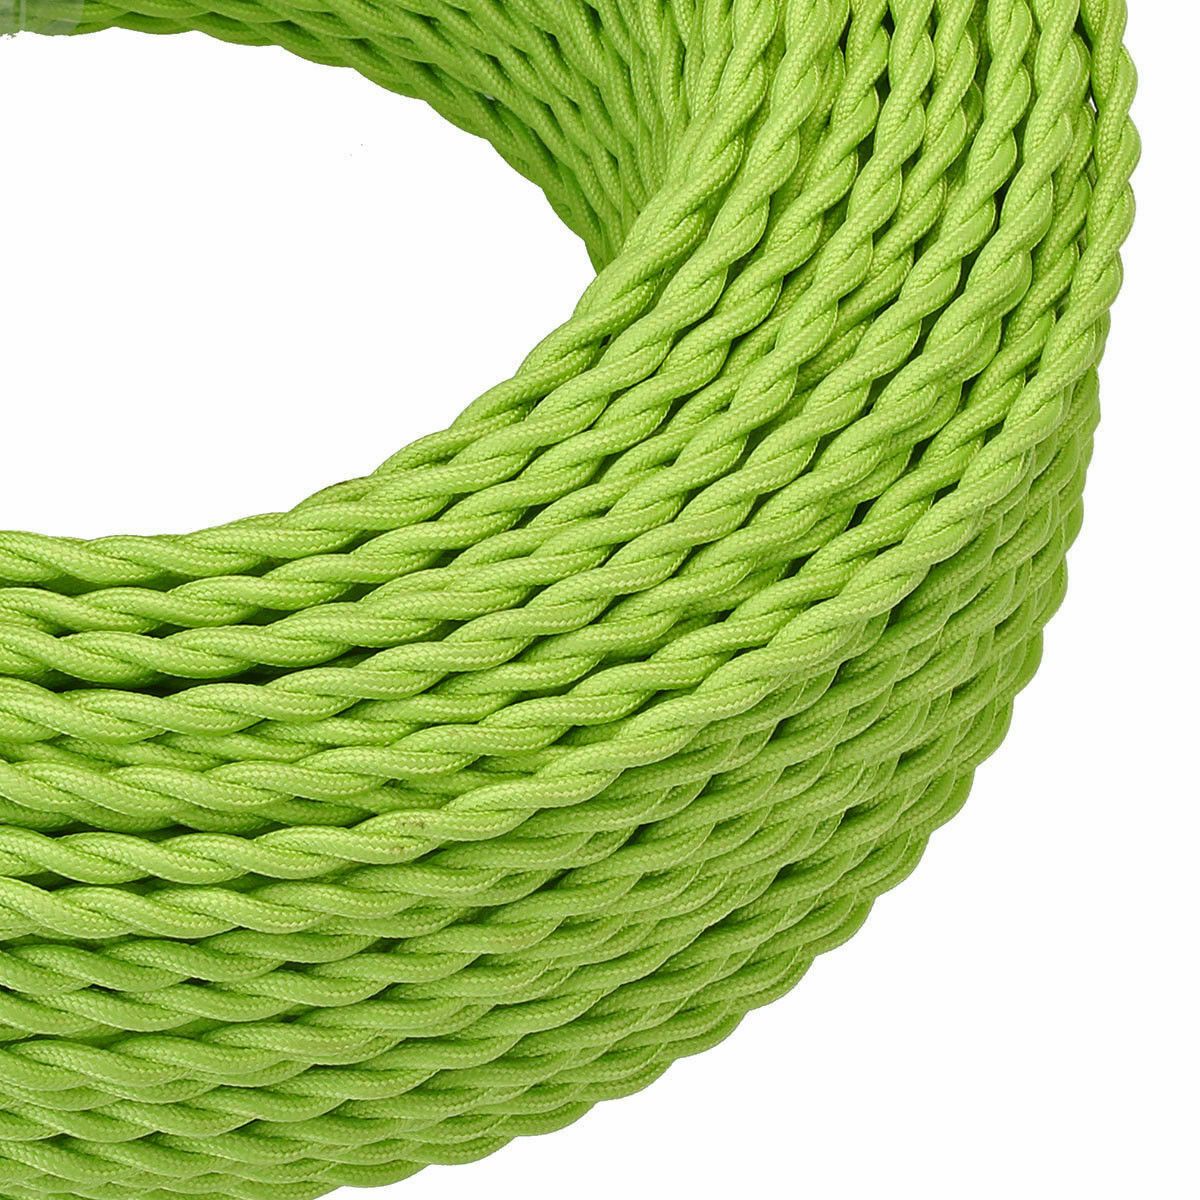 3 Core Braided Twisted Green Fabric Cord